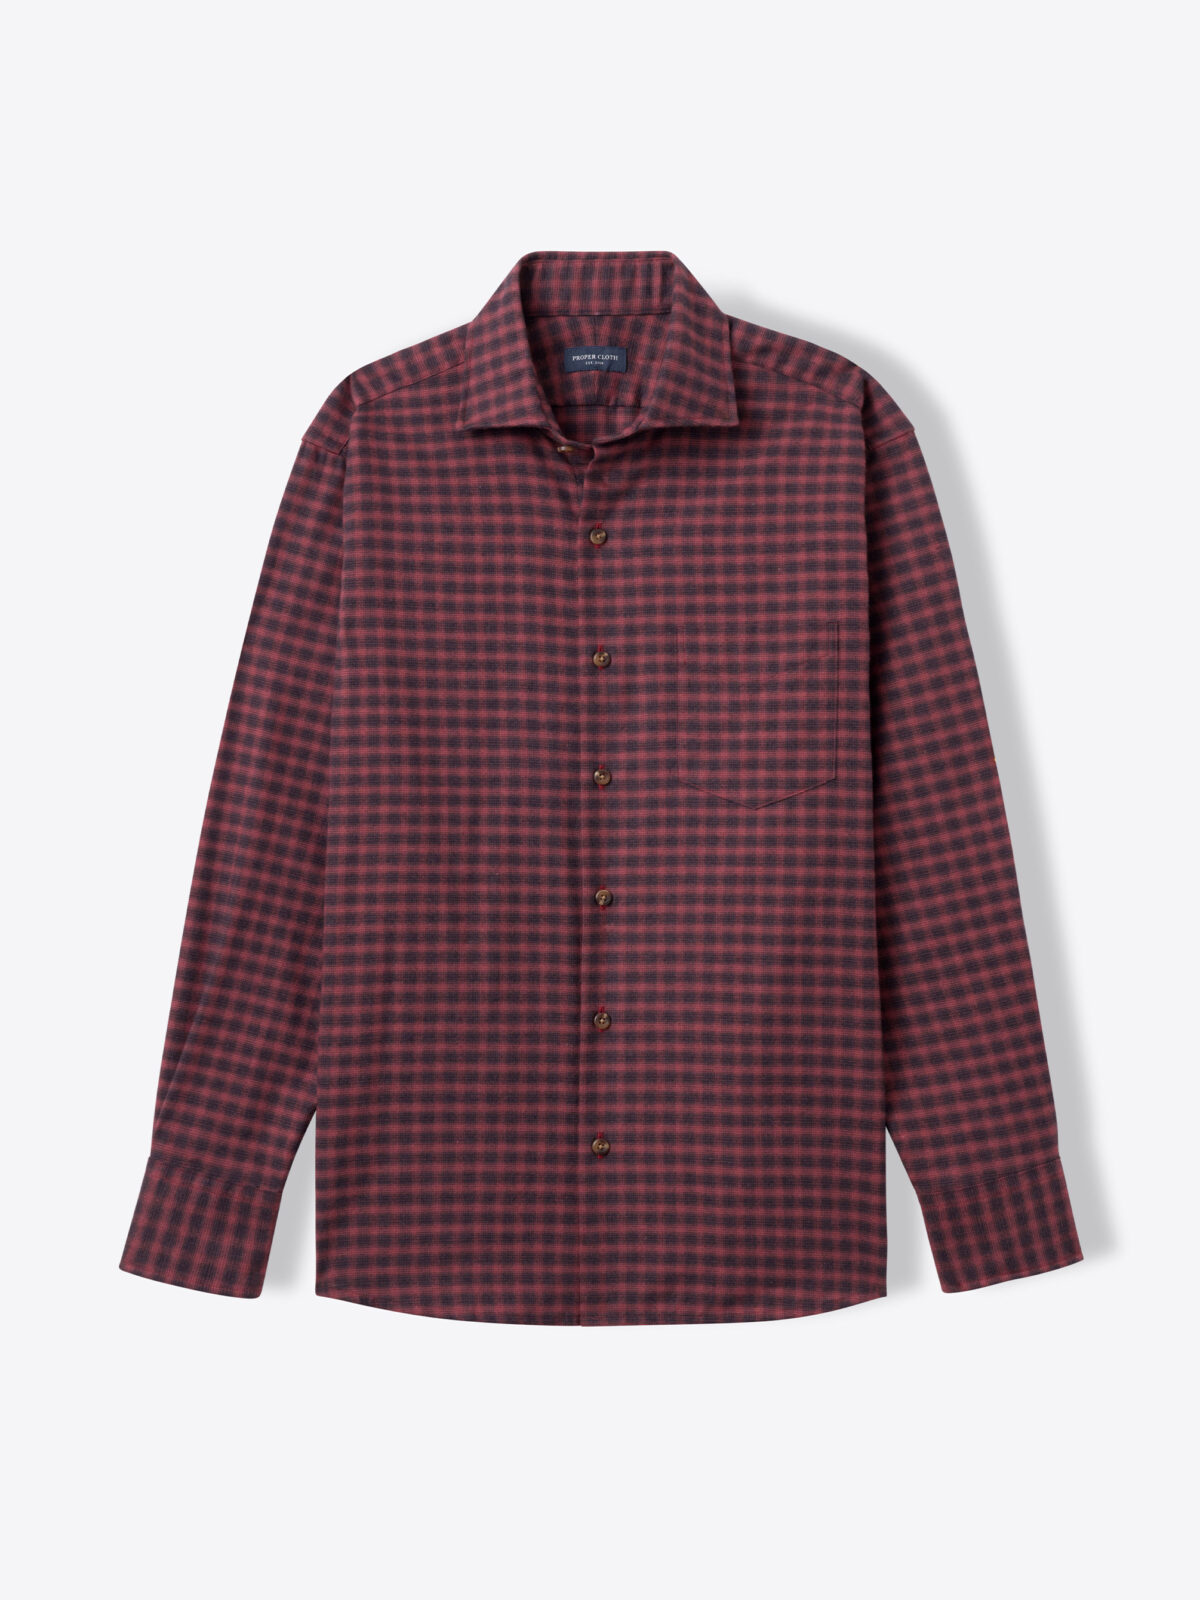 Kent Scarlet Ombre Check Lightweight Flannel Shirt by Proper Cloth